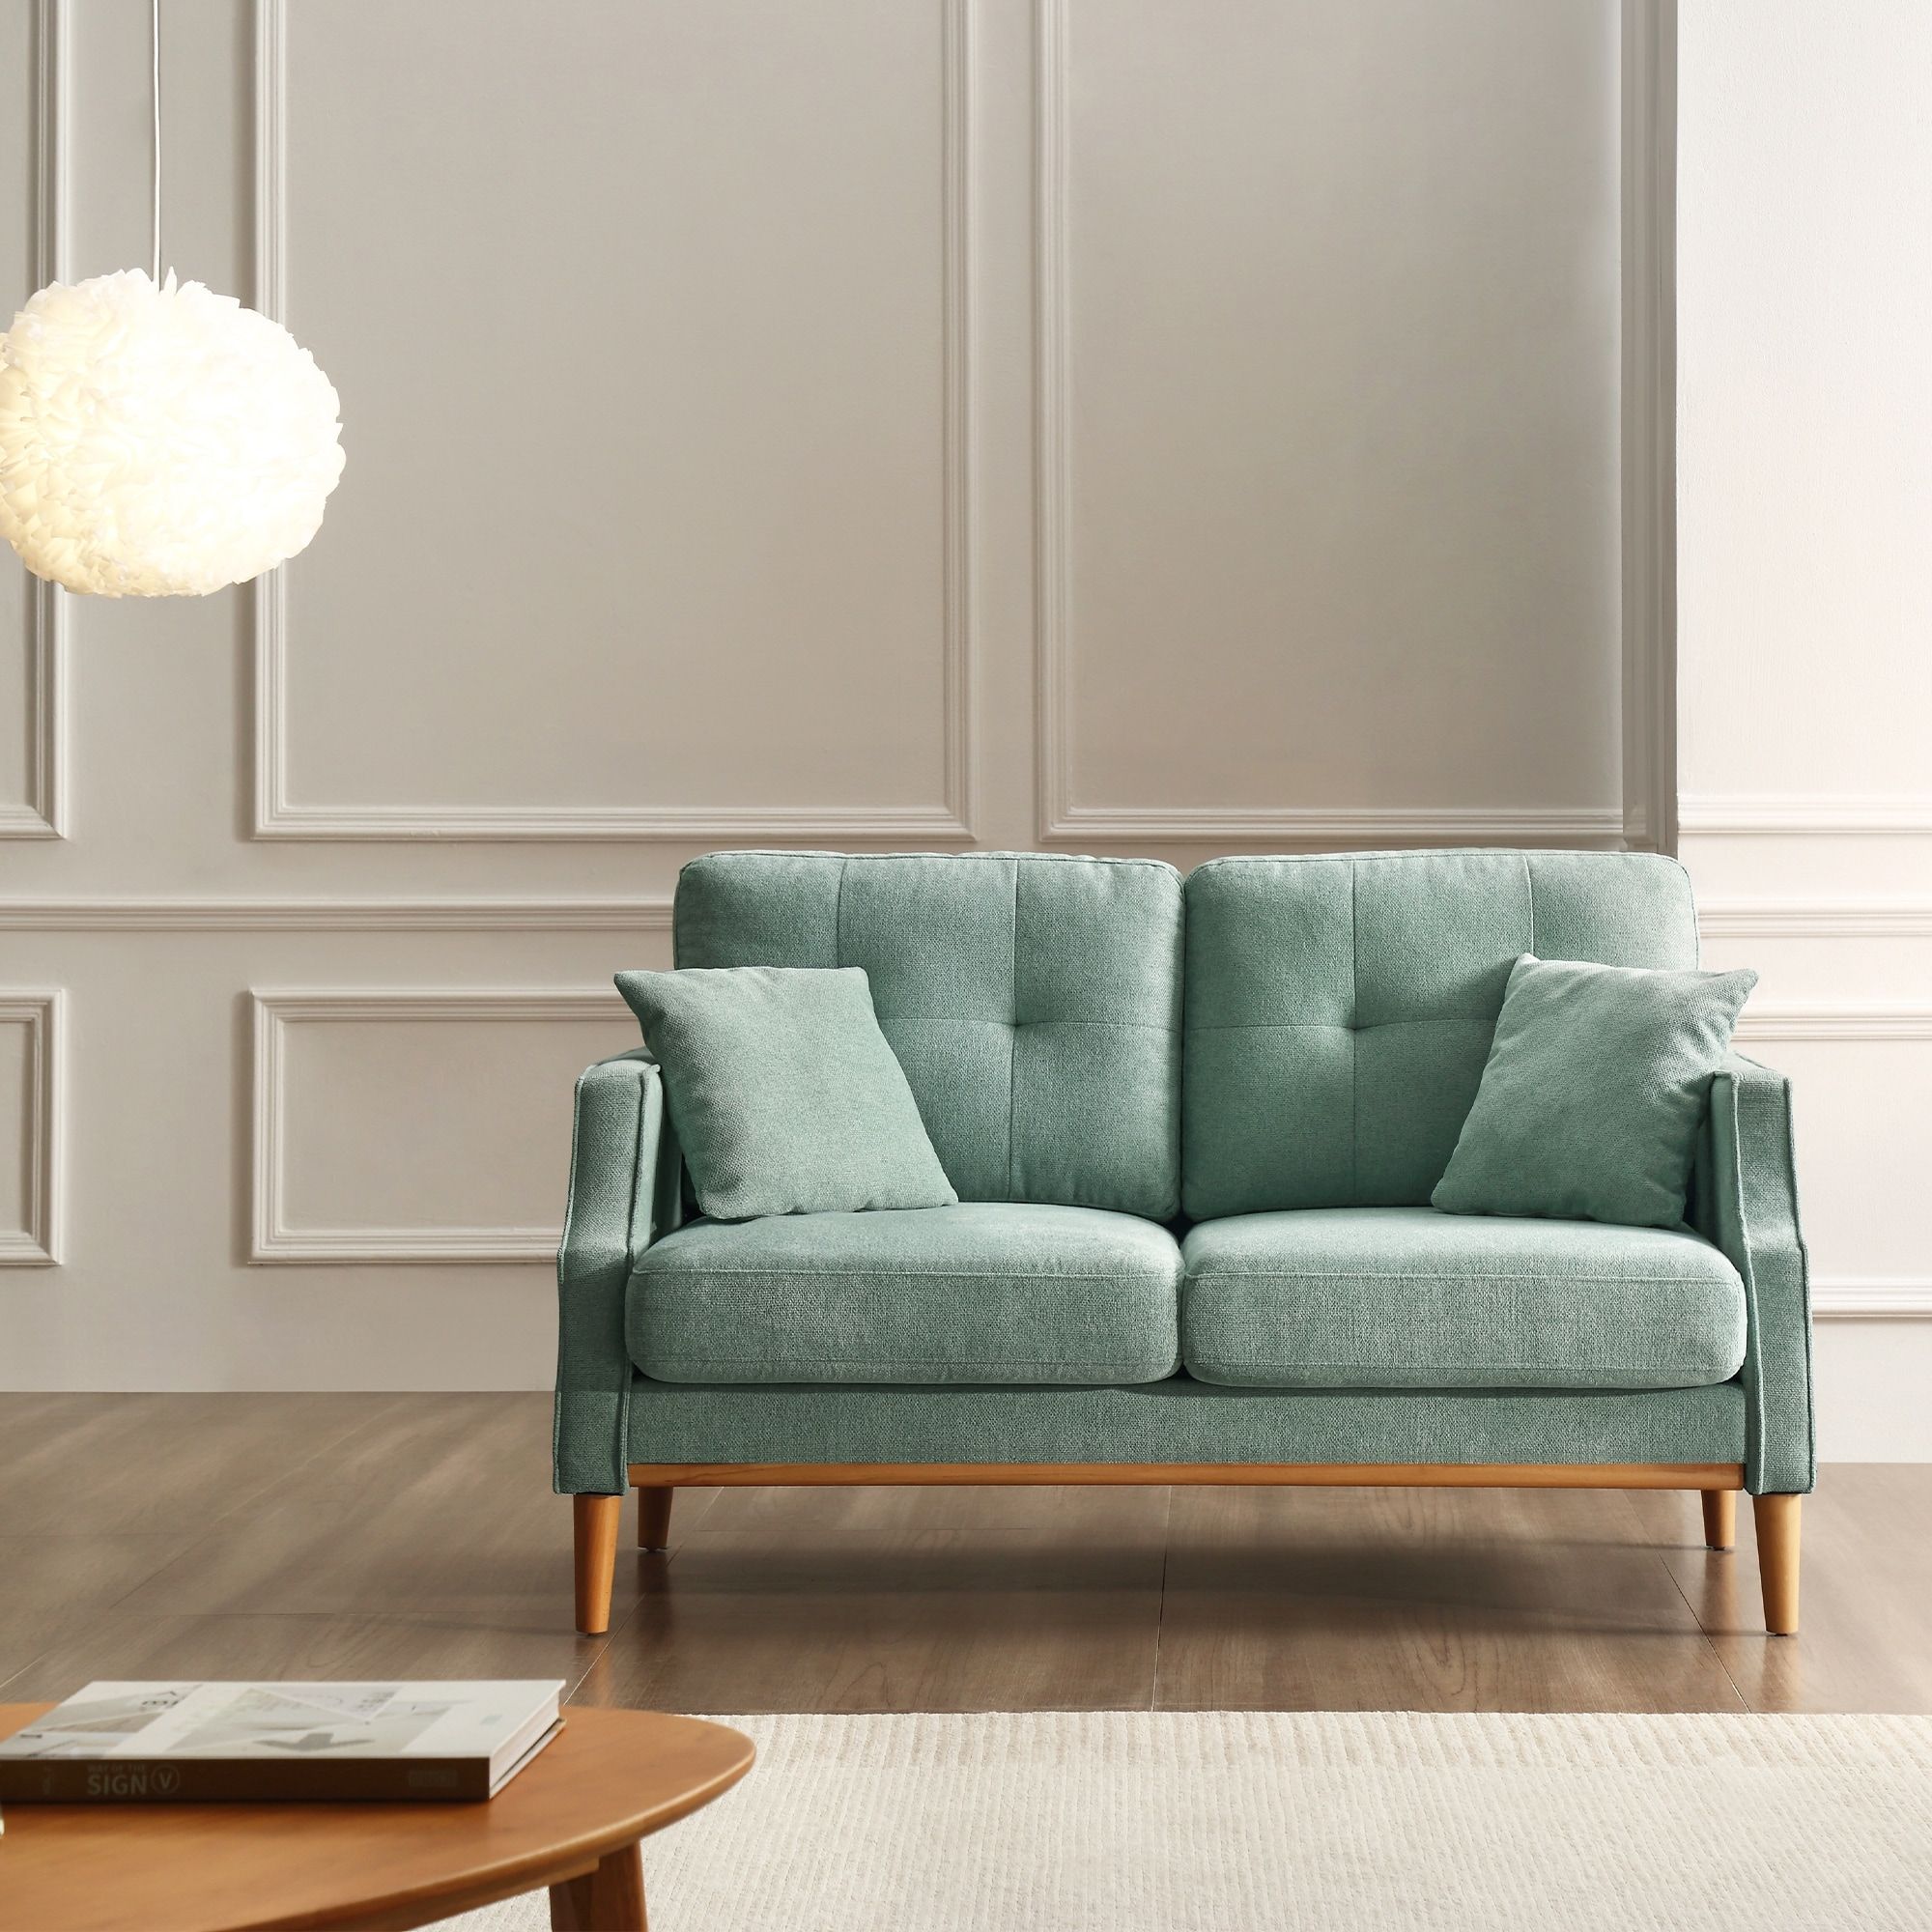 2 Seater Sofa : The Best Affordable Two Seater Sofa Options Available Now